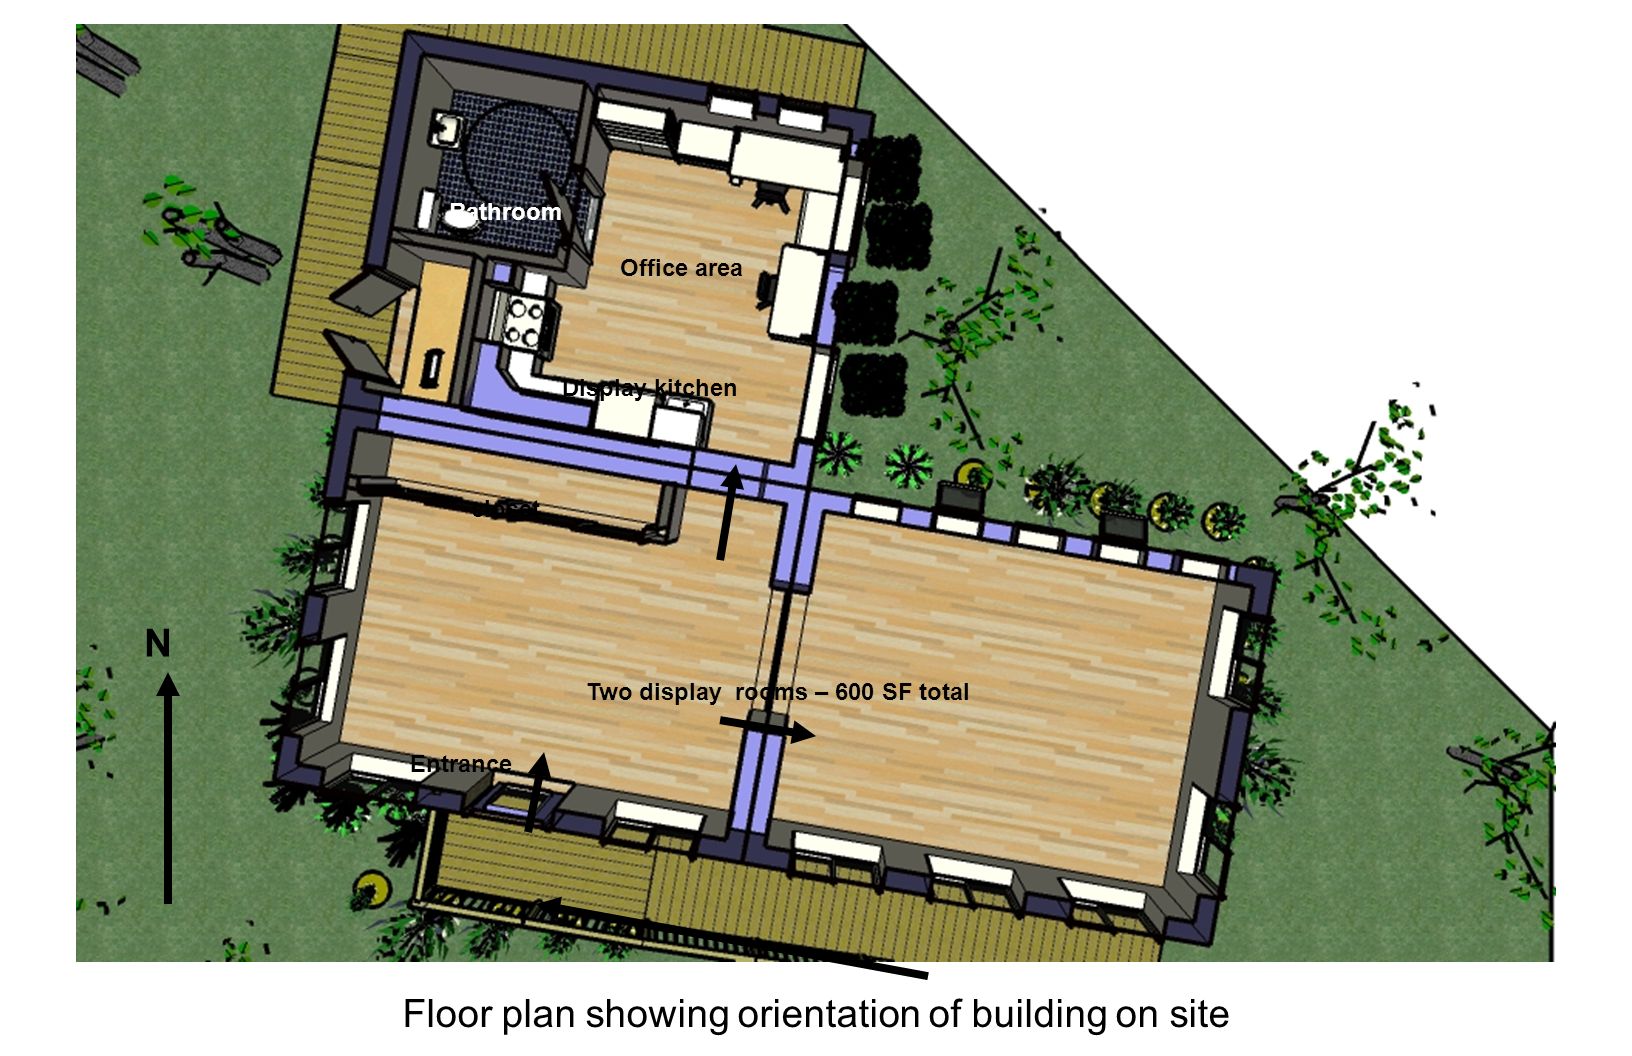 N Entrance Two display rooms – 600 SF total Display kitchen Office area Bathroom closet Floor plan showing orientation of building on site